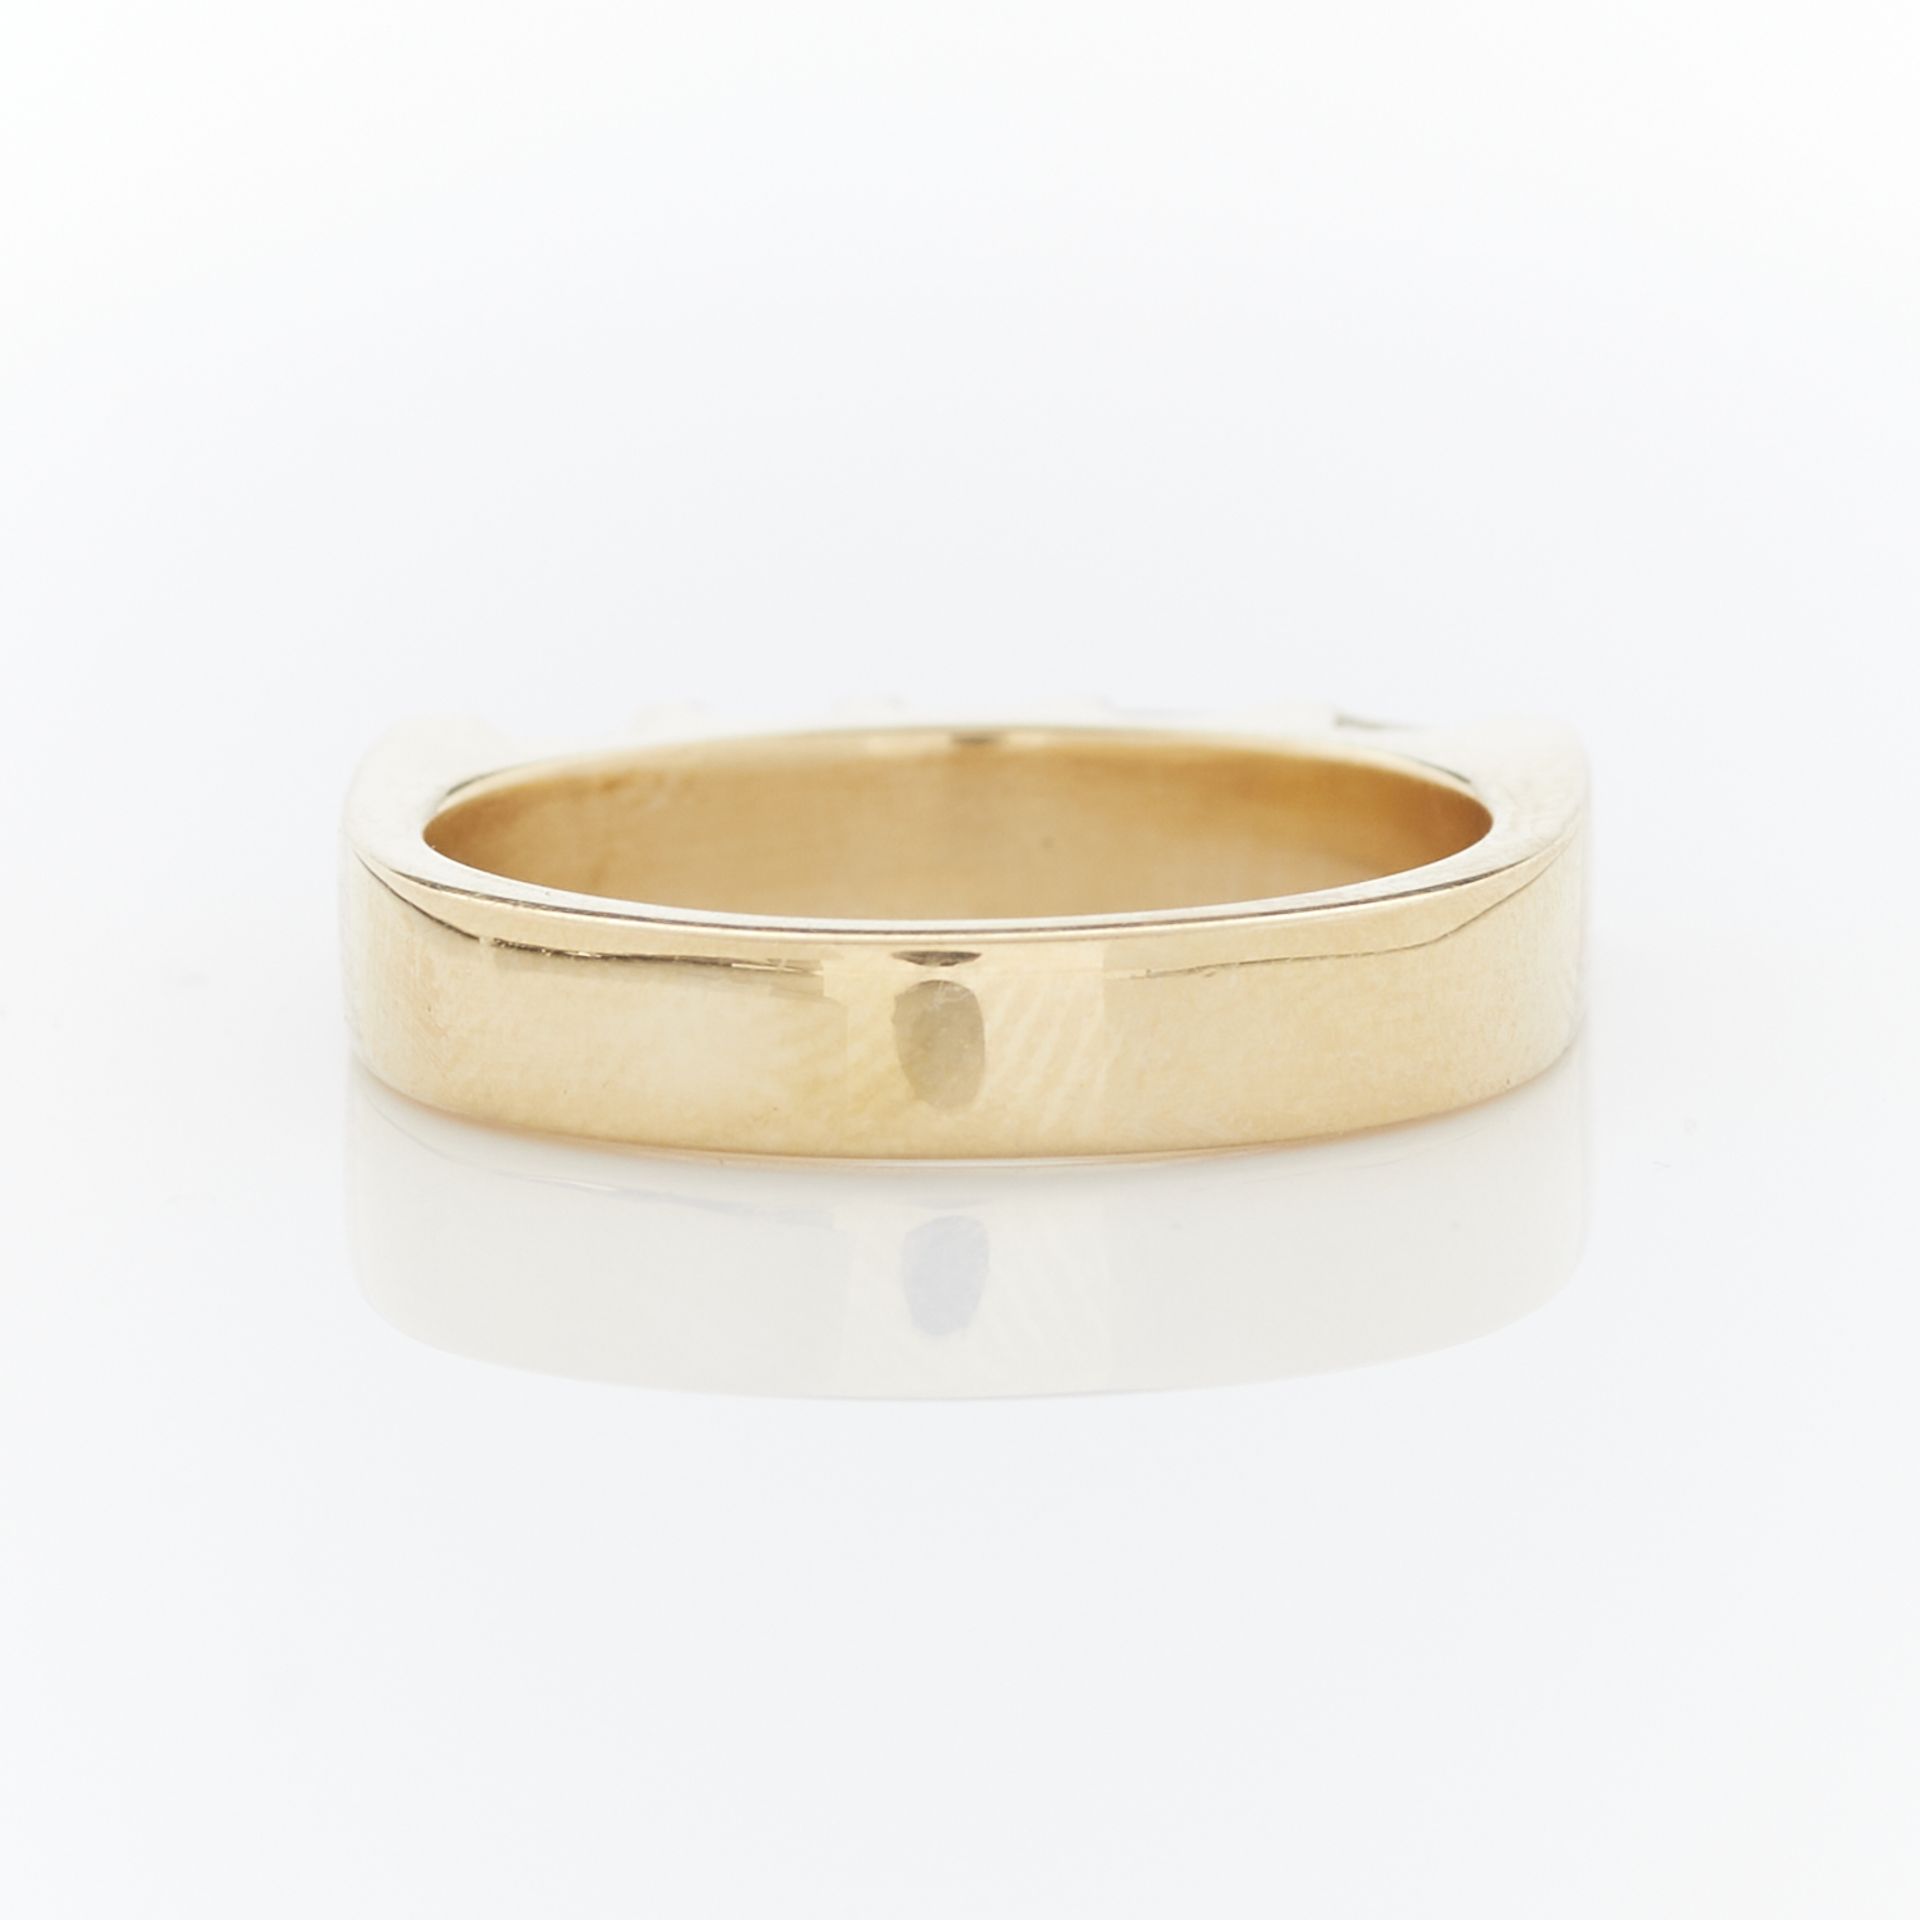 14k Yellow Gold & Sapphire Ring - Image 7 of 11